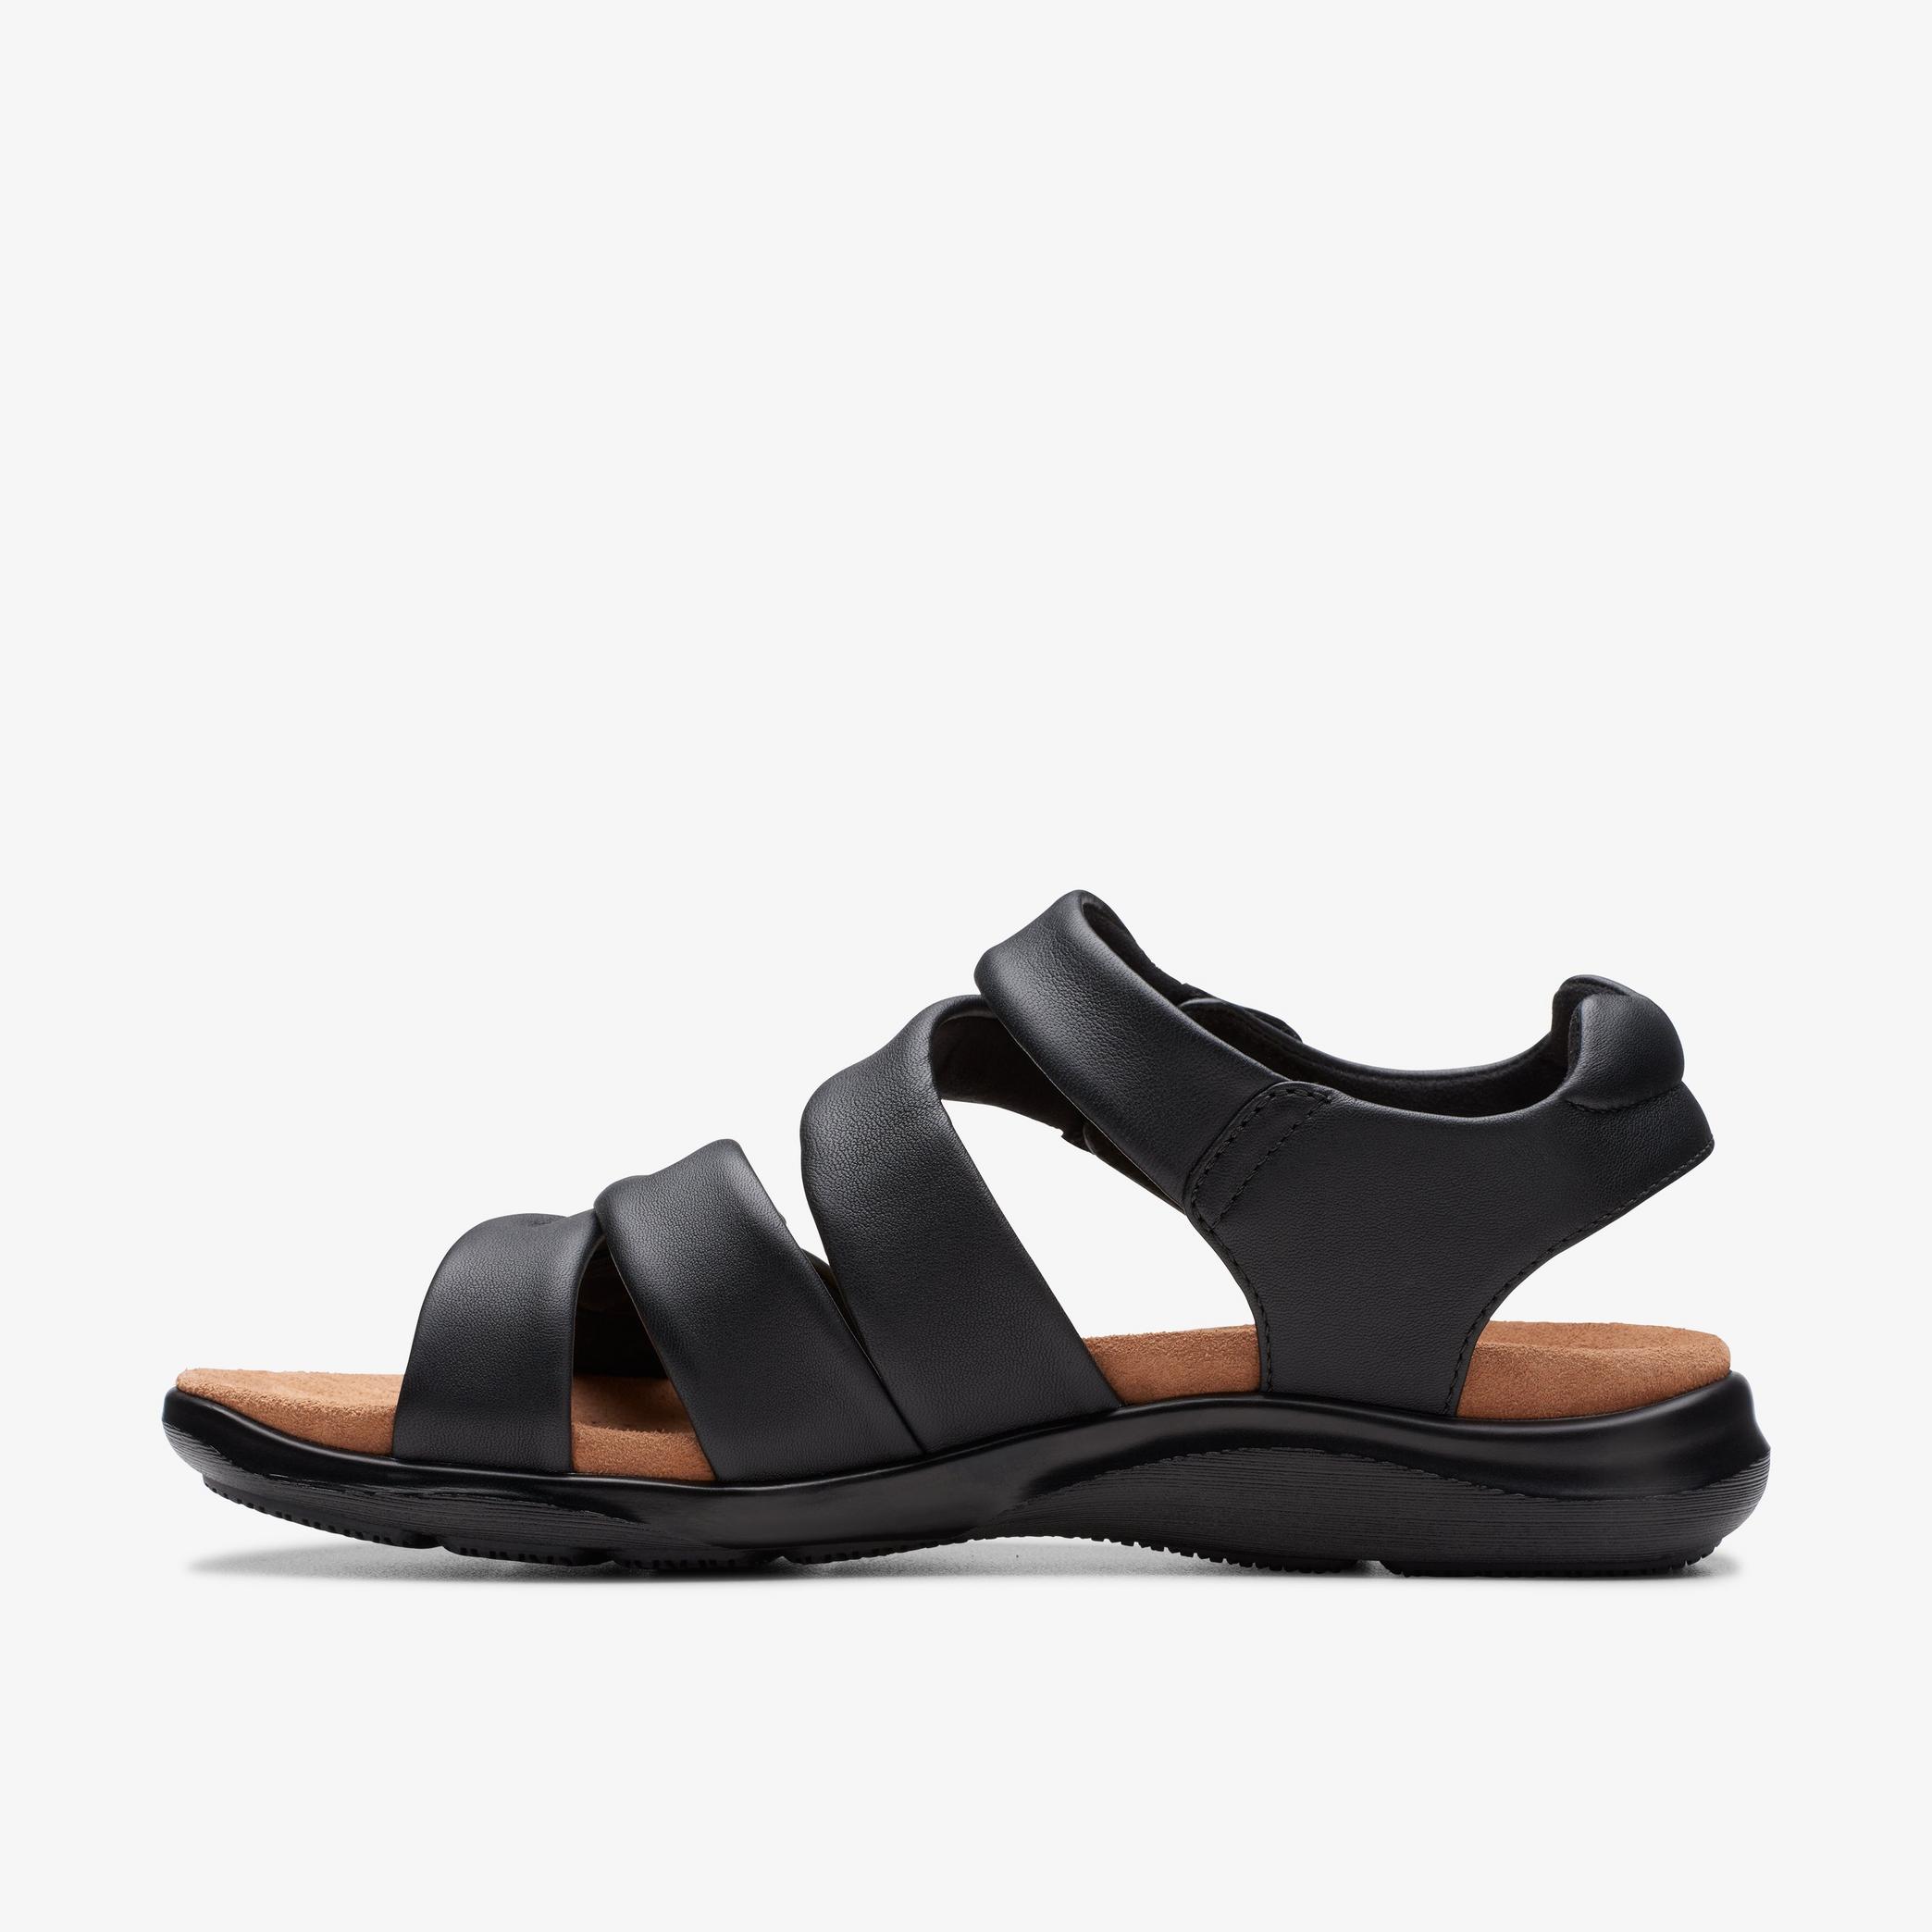 Kitly Ave Black Leather Flat Sandals, view 2 of 6